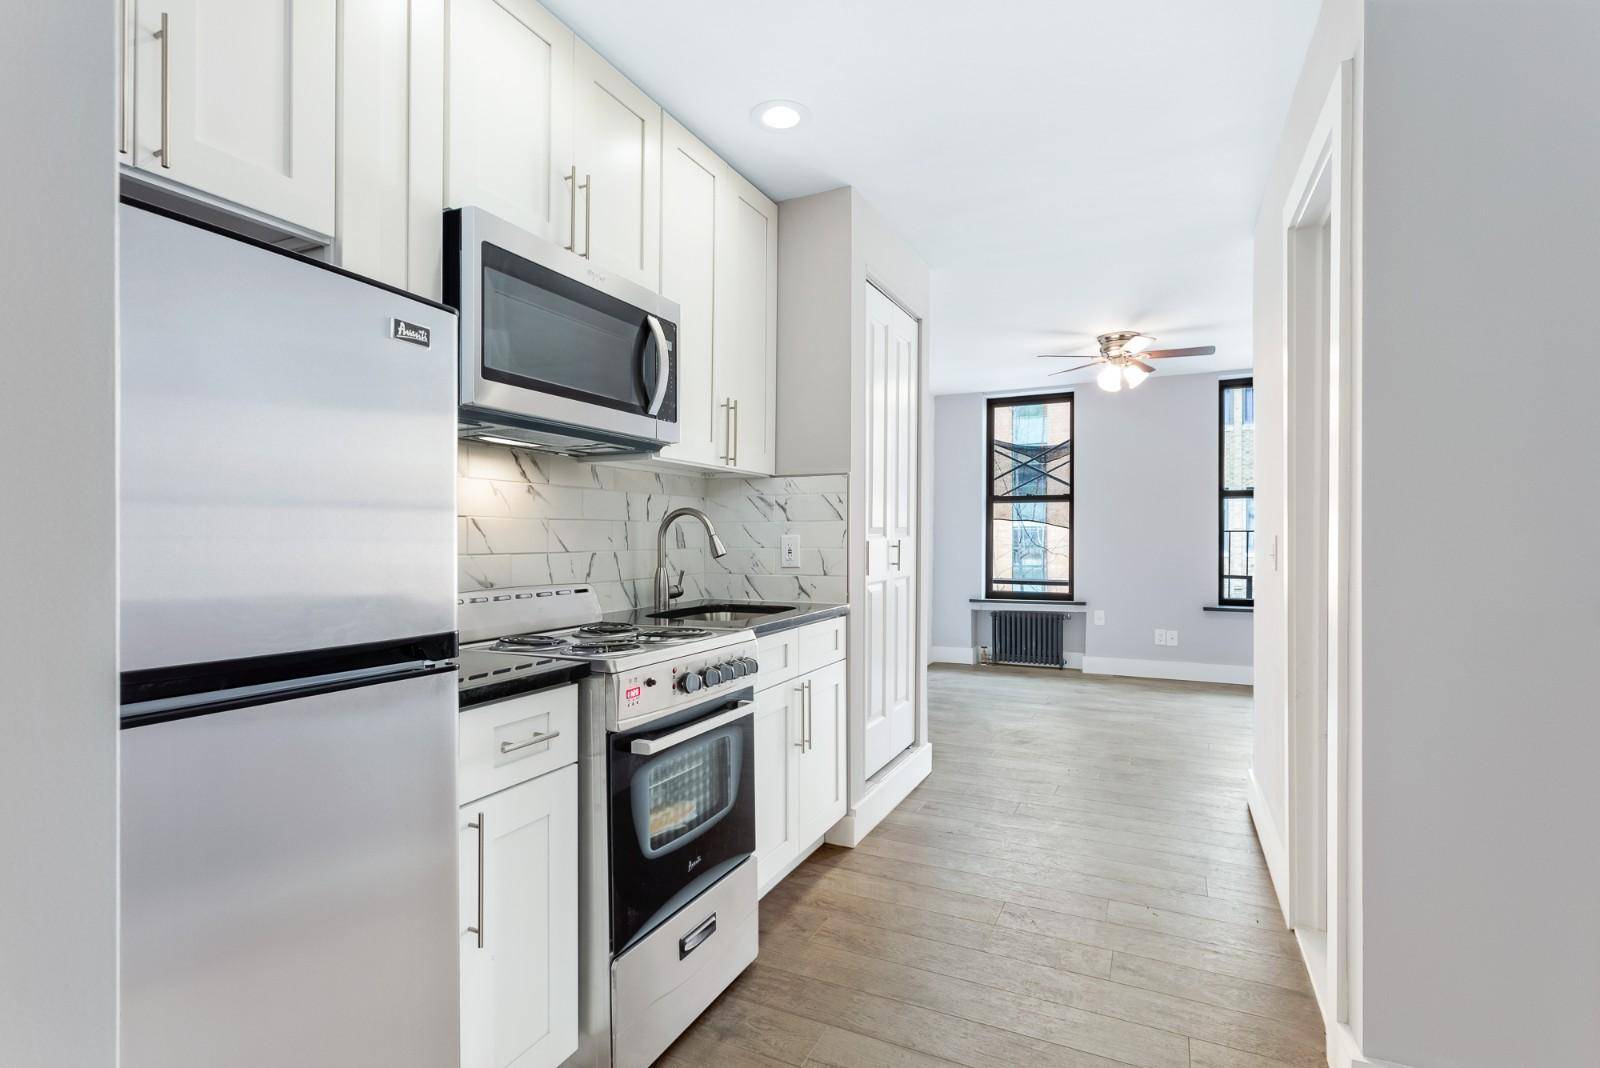 APARTMENT DETAILS NO BROKER FEE Total Gut Renovated W D IN UNIT DISHWASHER GRANITE KITCHEN Stainless Appliances Excellent light Queen Size Bedroom Large Closets Large Living Room Hardwood Floors Throughout ...